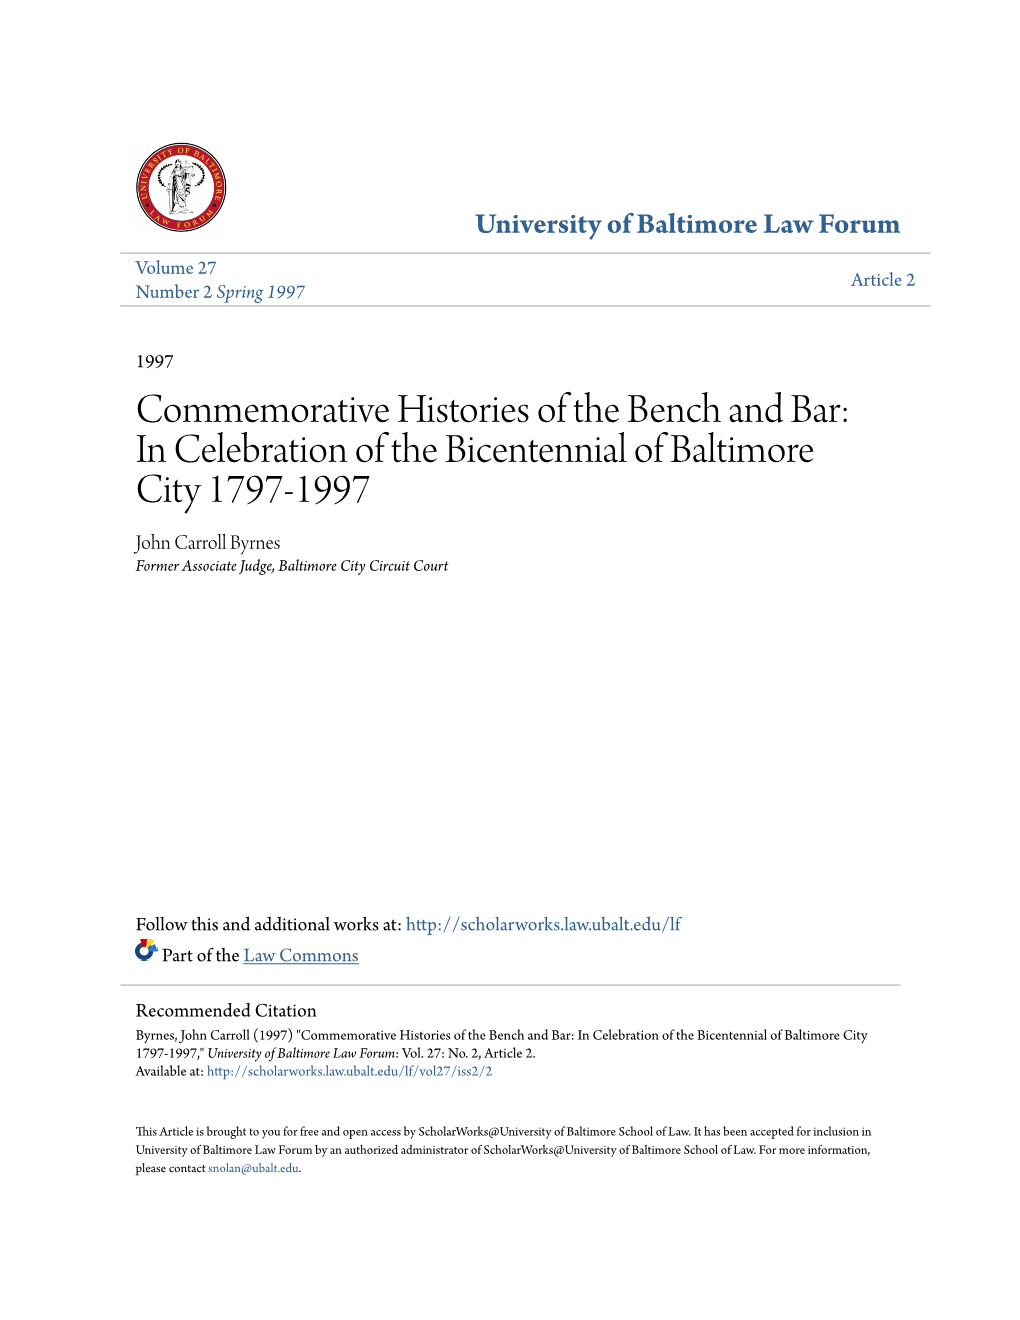 Commemorative Histories of the Bench and Bar: in Celebration Of